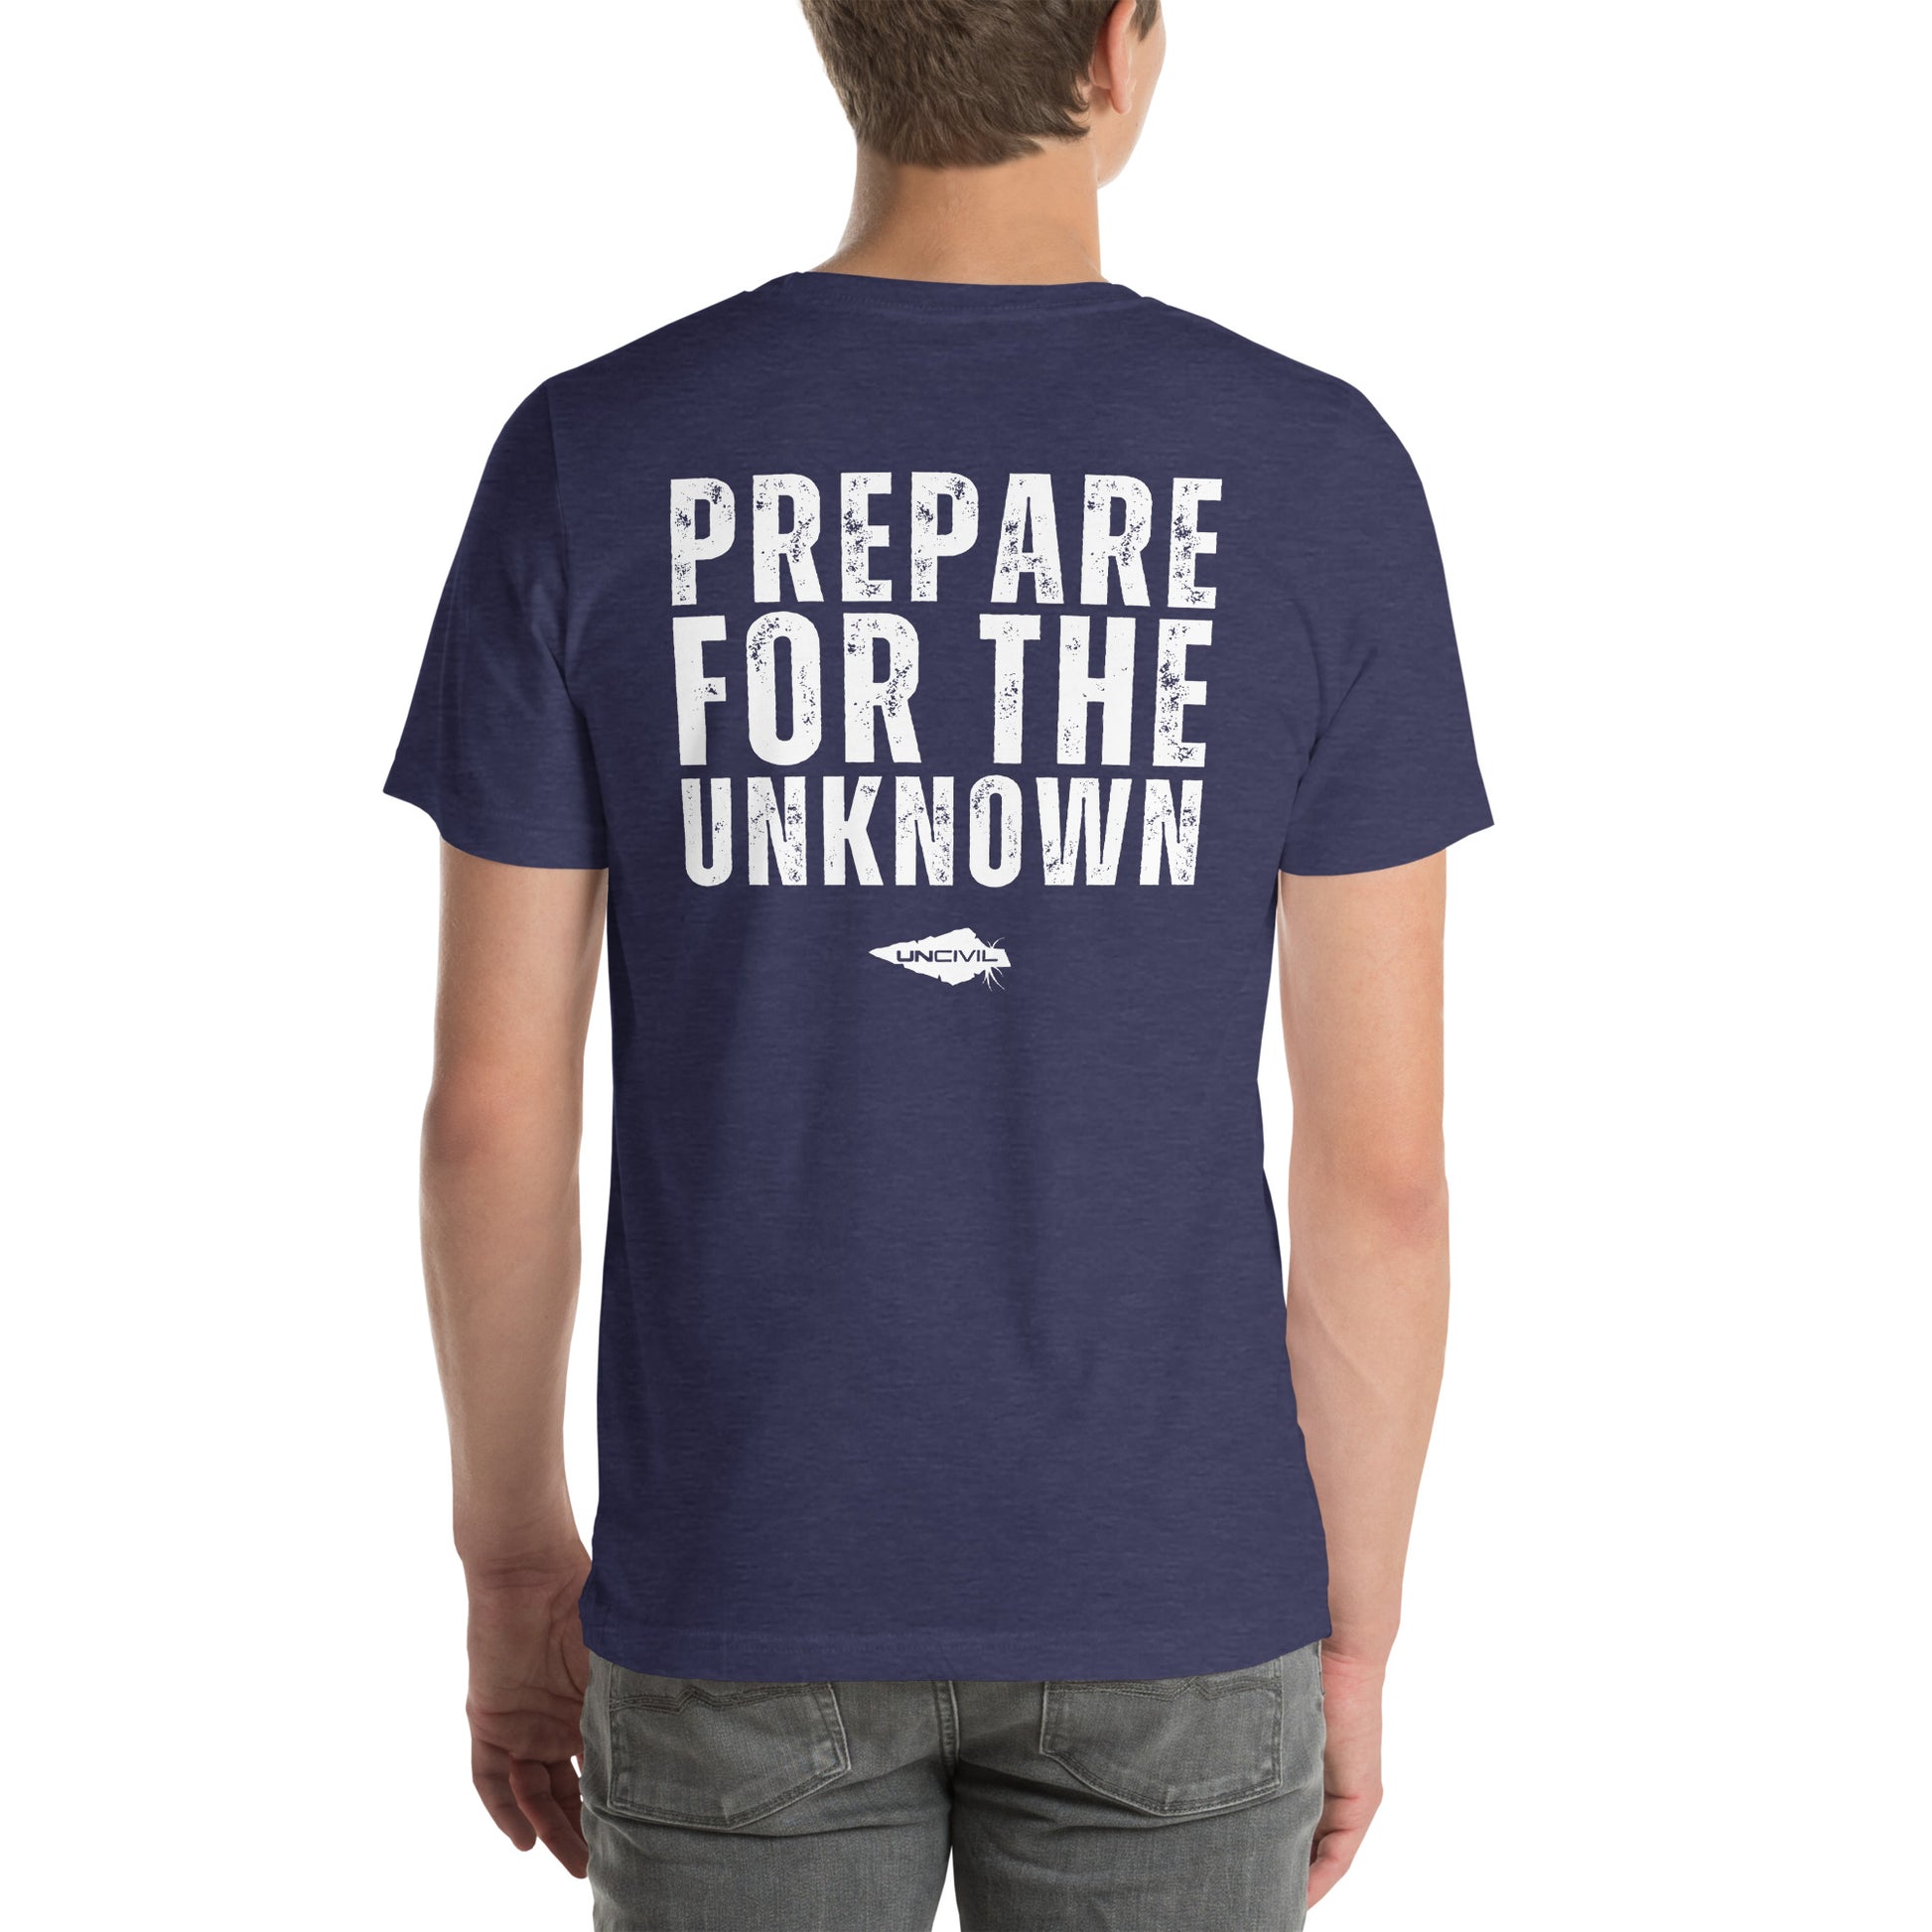 Prepare for the Unknown t-shirt UNCIVIL heather royal blue